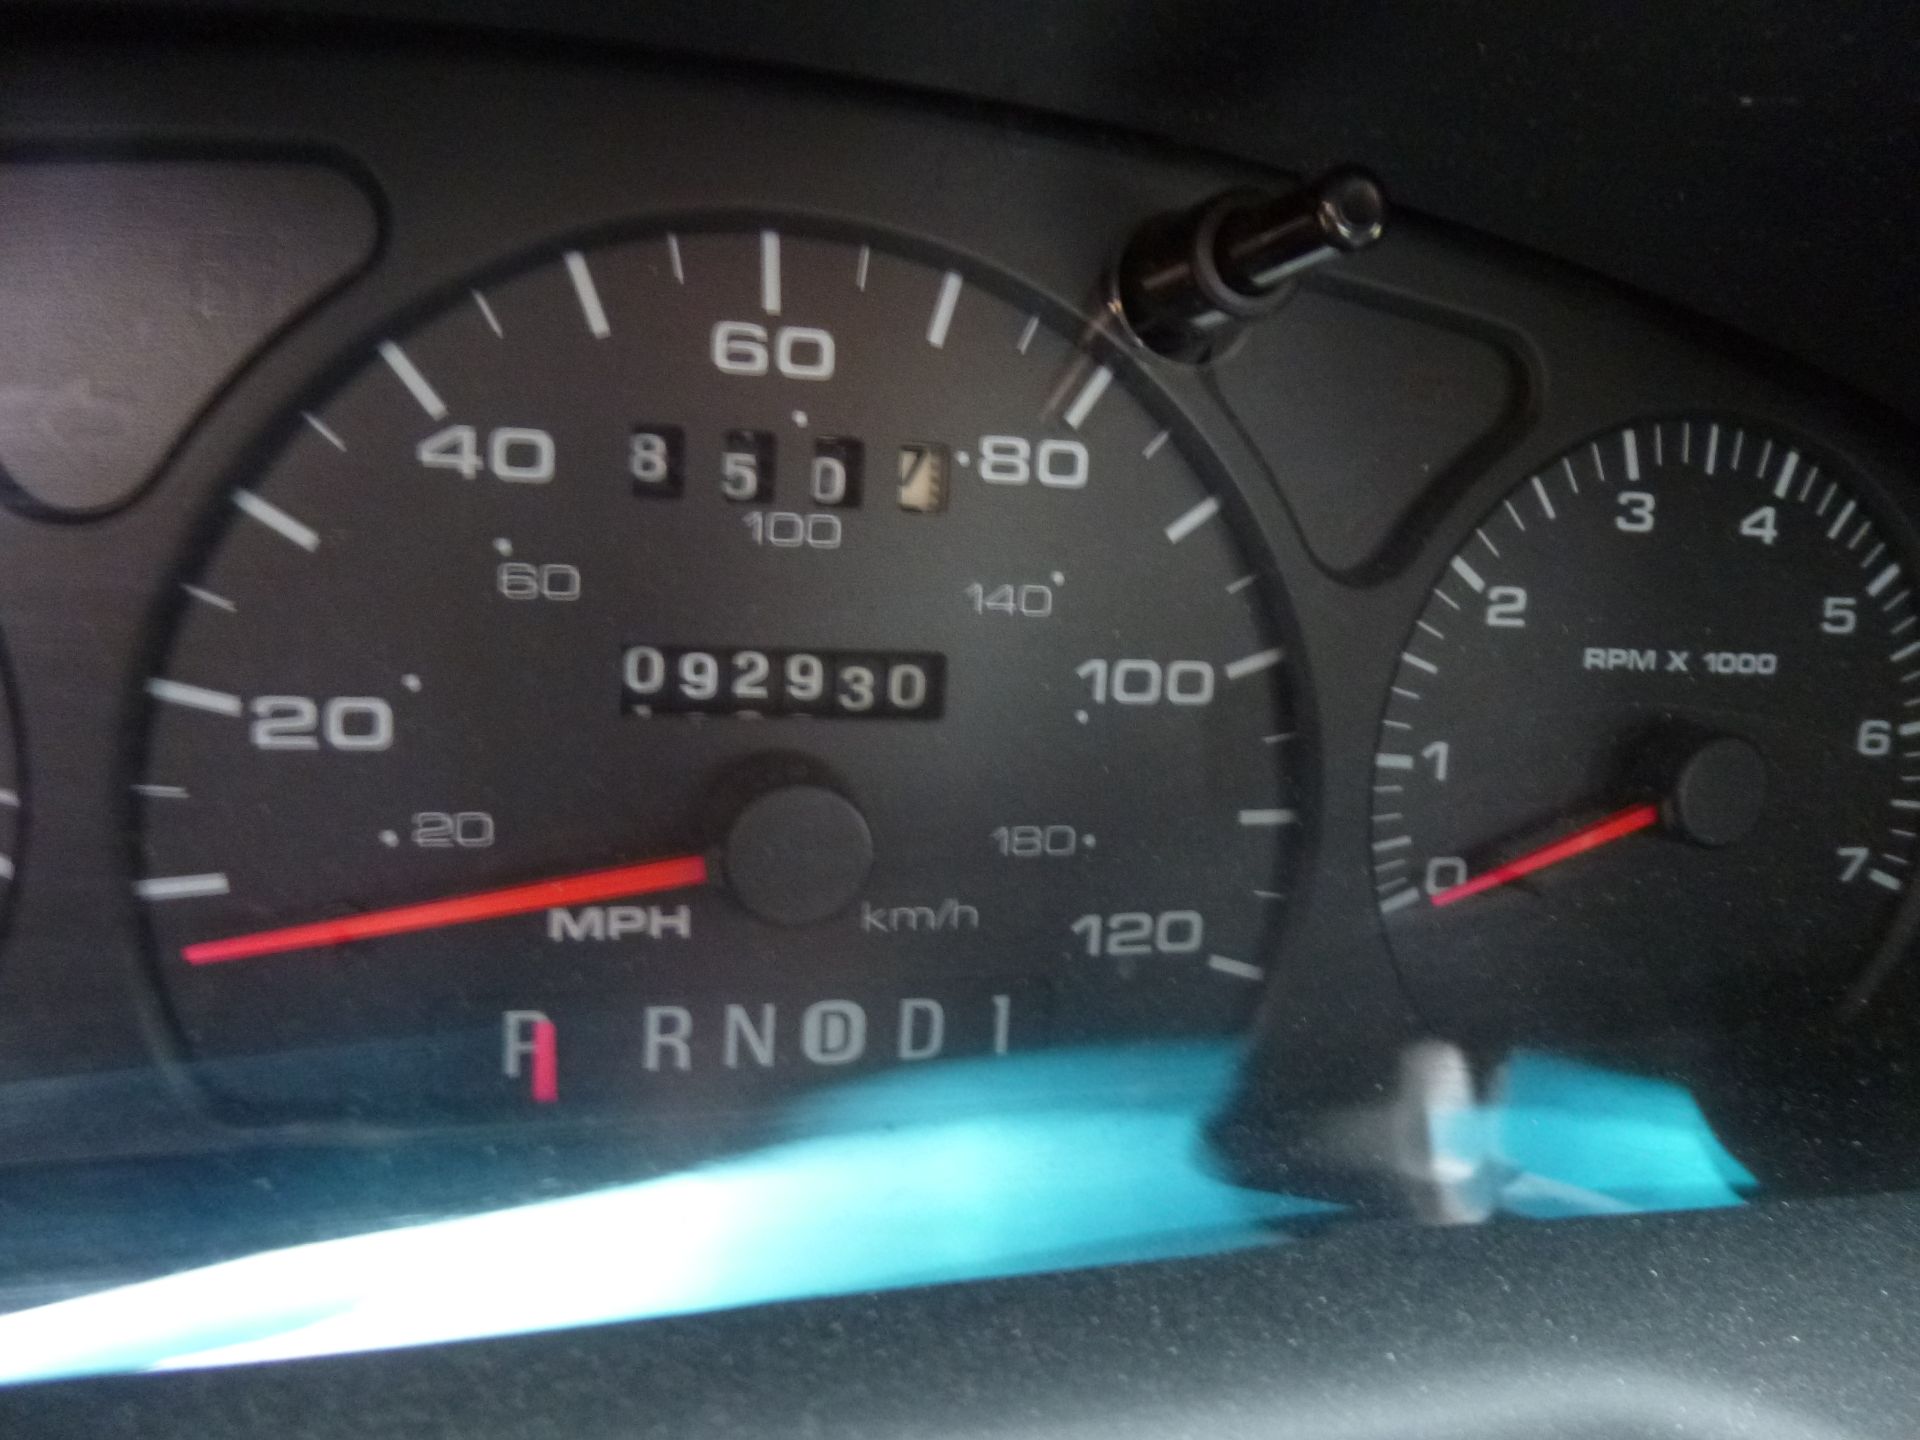 2002 Ford Taurus Municipally maintained Miles 92930 Vin # 1FAFP532X2G180779 CLEAR TITLE(located at - Image 11 of 12